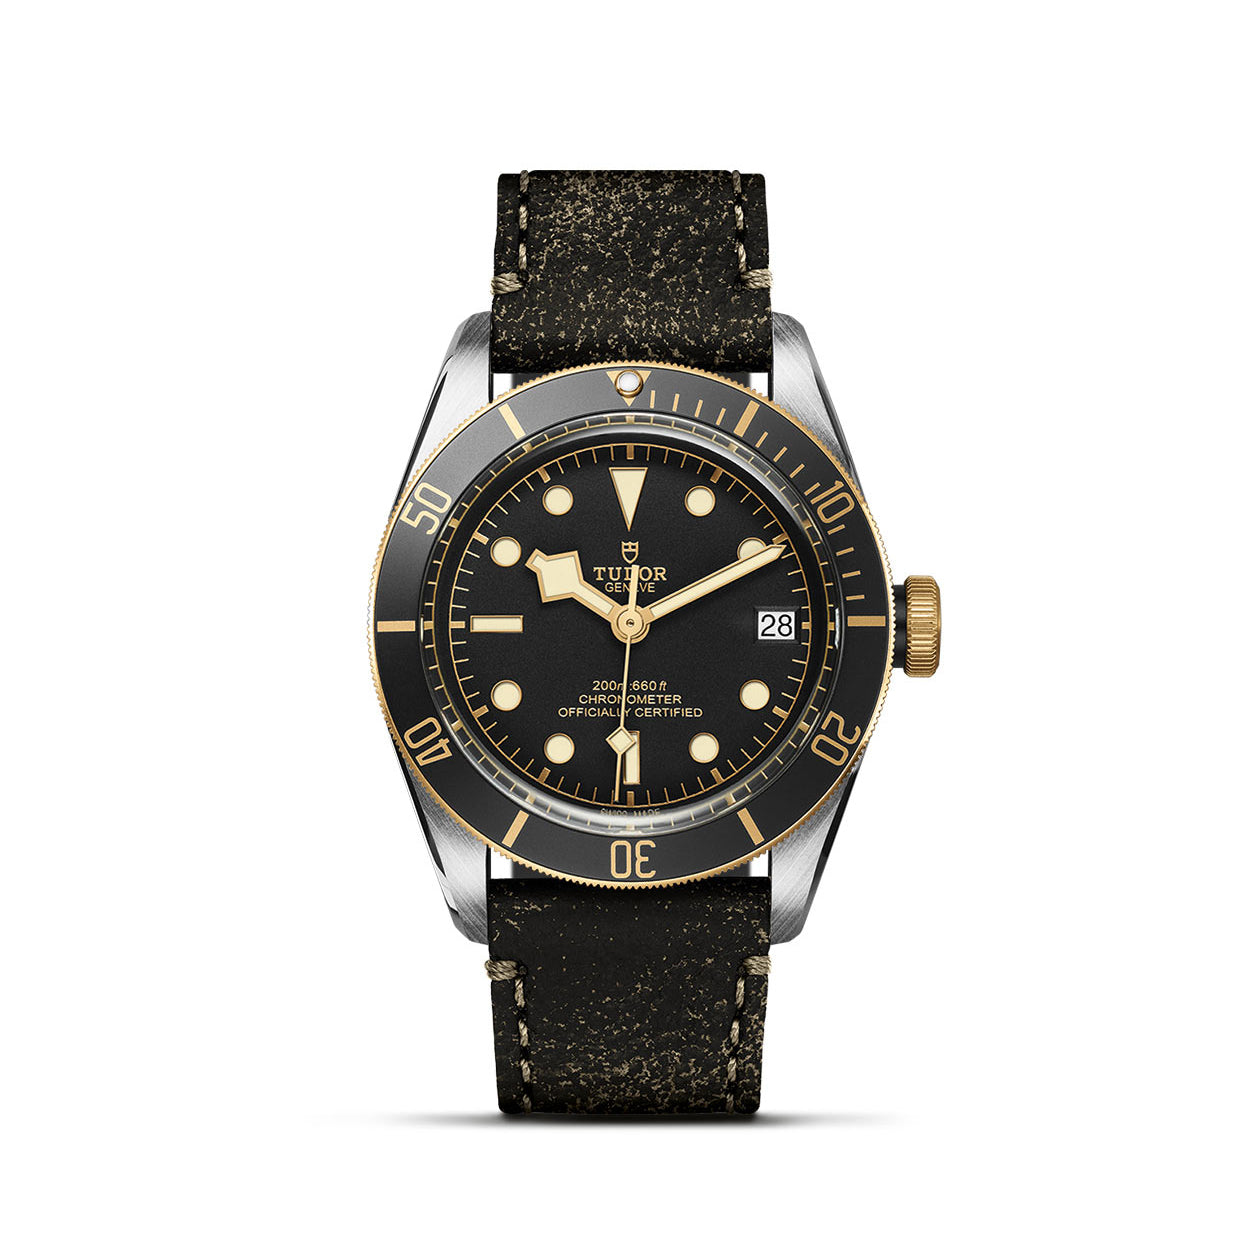 TUDOR Black Bay S&G Watch with Aged Leather Strap